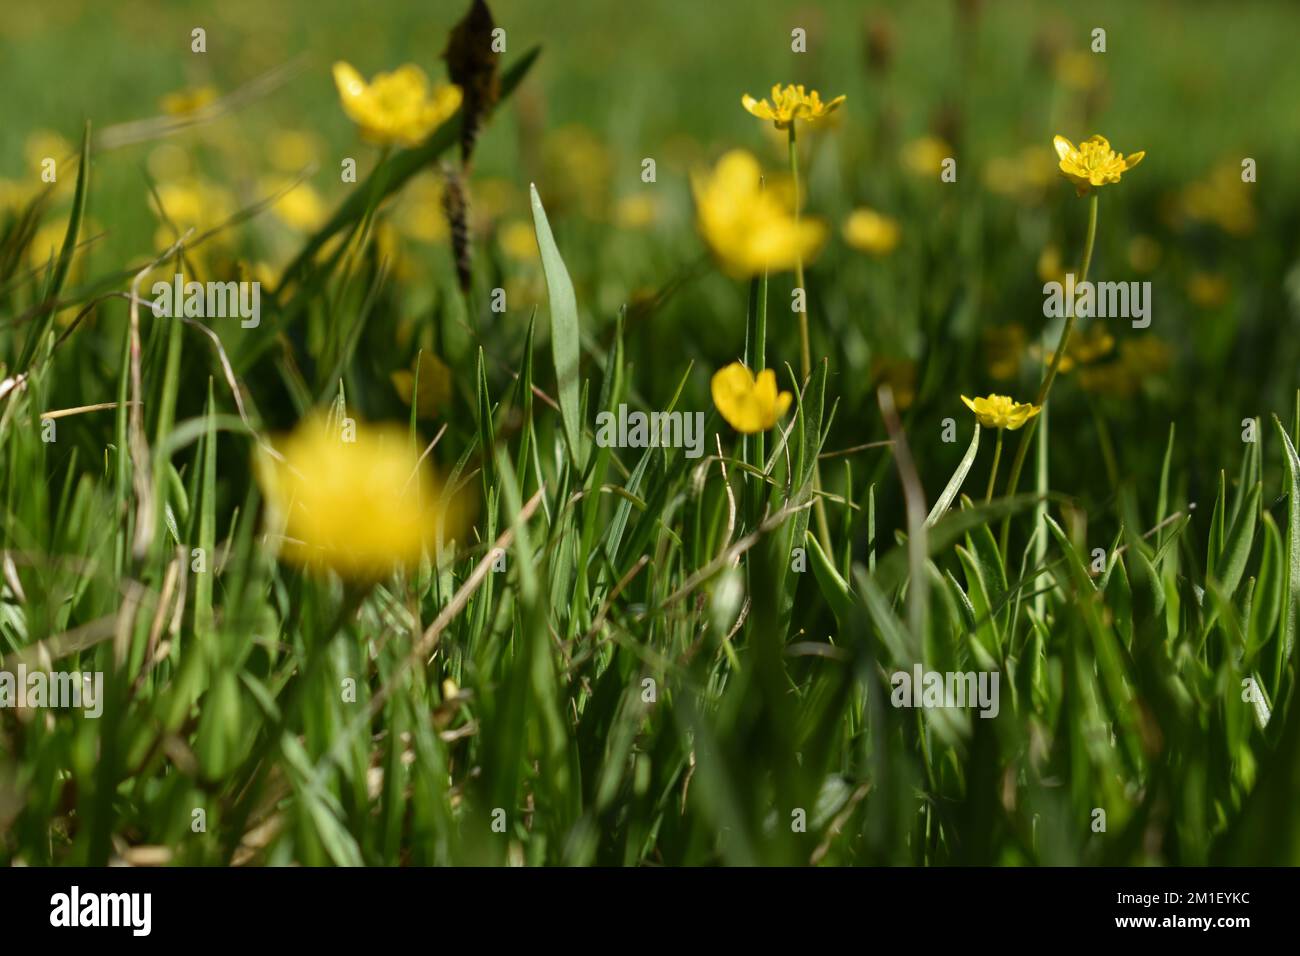 Flowers in a field of grass Stock Photo